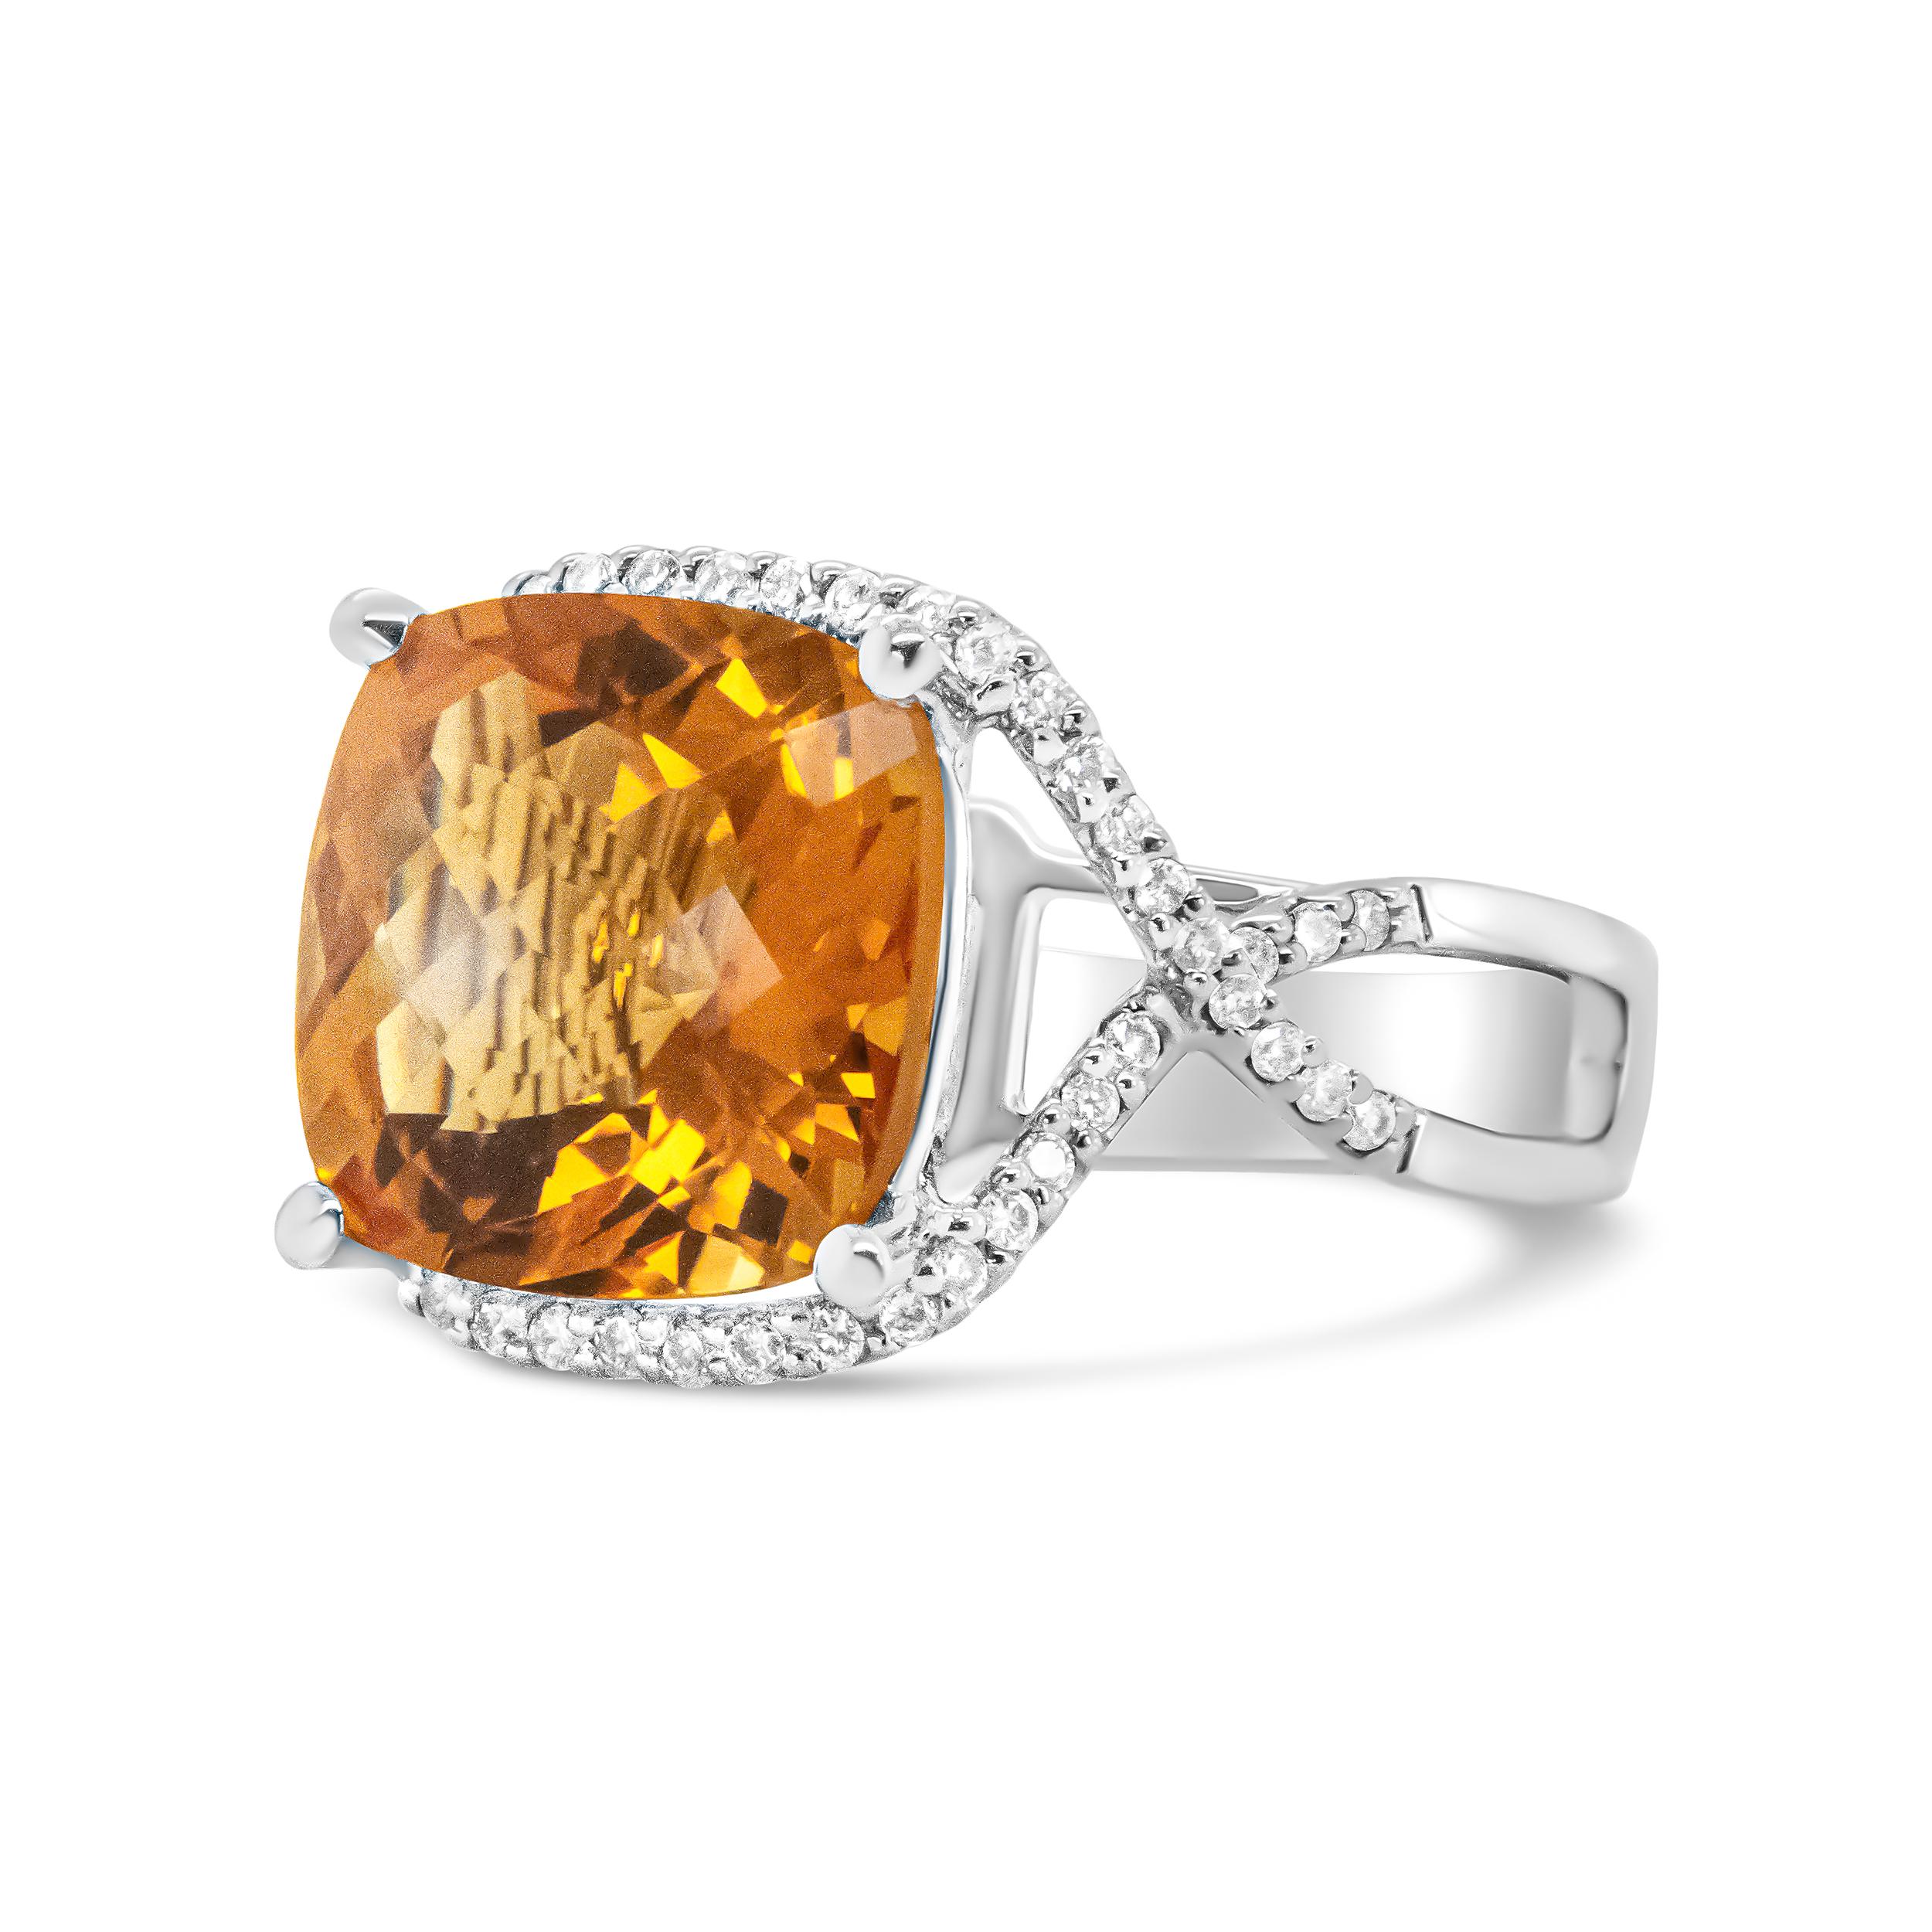 Fall in love with the allure of this 14k white gold ring with a halo of pave set round diamonds that encircle a glittering 12mm cushion-cut yellow citrine gemstone cradled in a prong setting. The sparkling white diamonds cascade along a path where